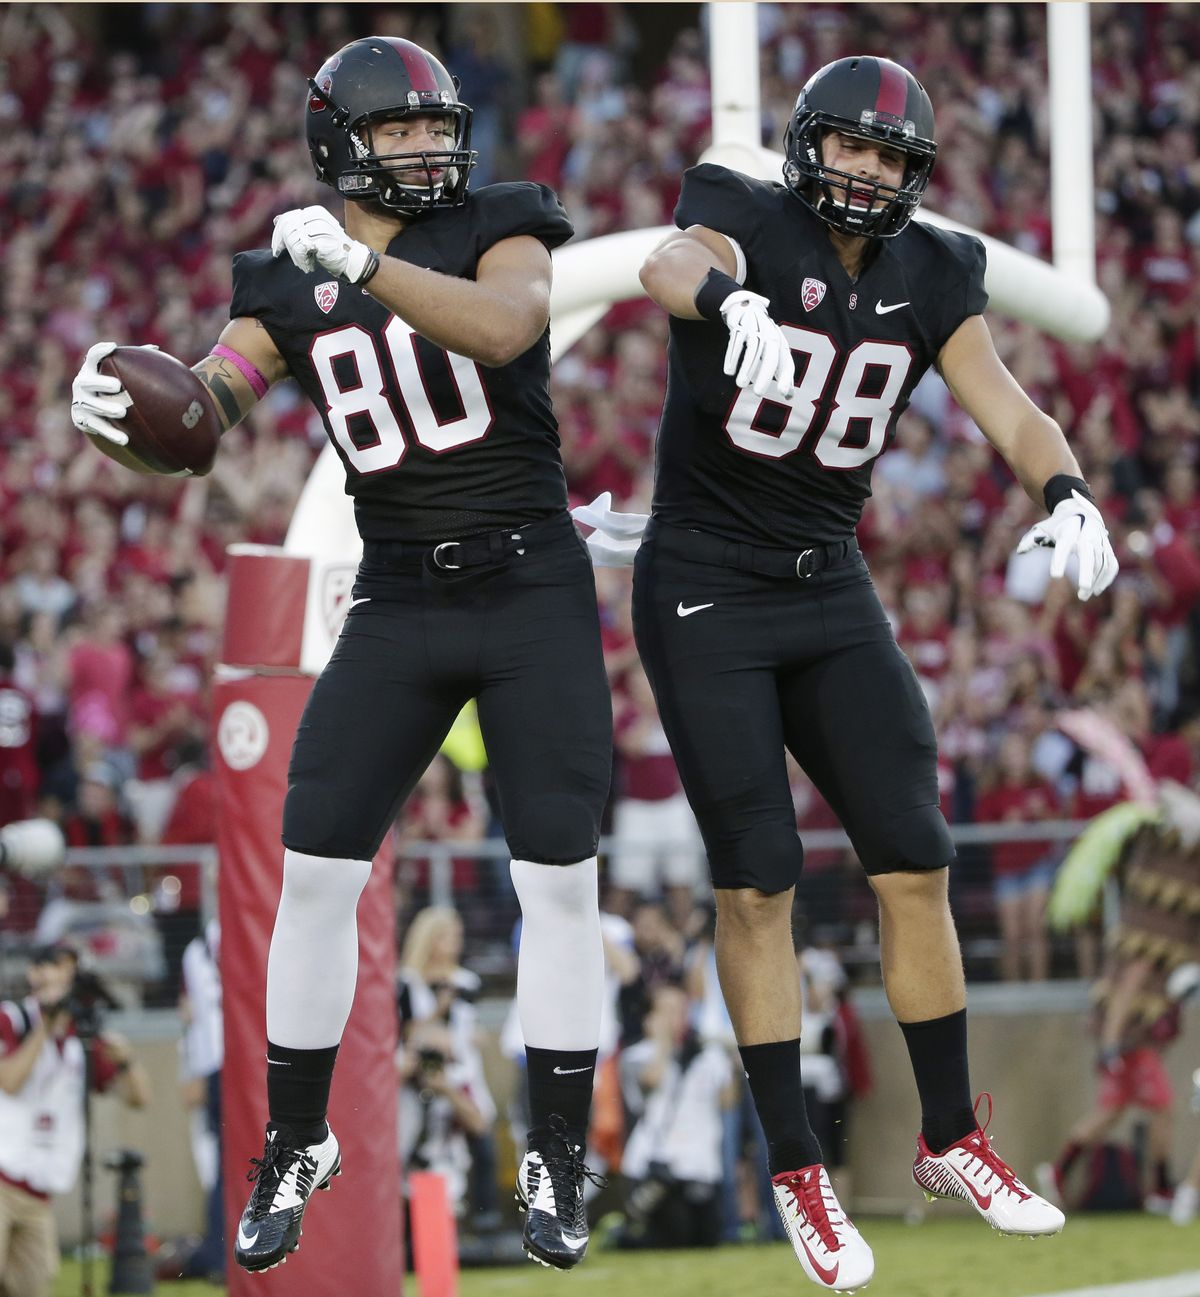 Stanford tight end Eric Cotton, left, celebrates his touchdown reception with teammate Greg Taboada during the first half of an NCAA college football game on Friday, Oct. 10, 2014, in Stanford, Calif. (Marcio Sanchez / Associated Press)